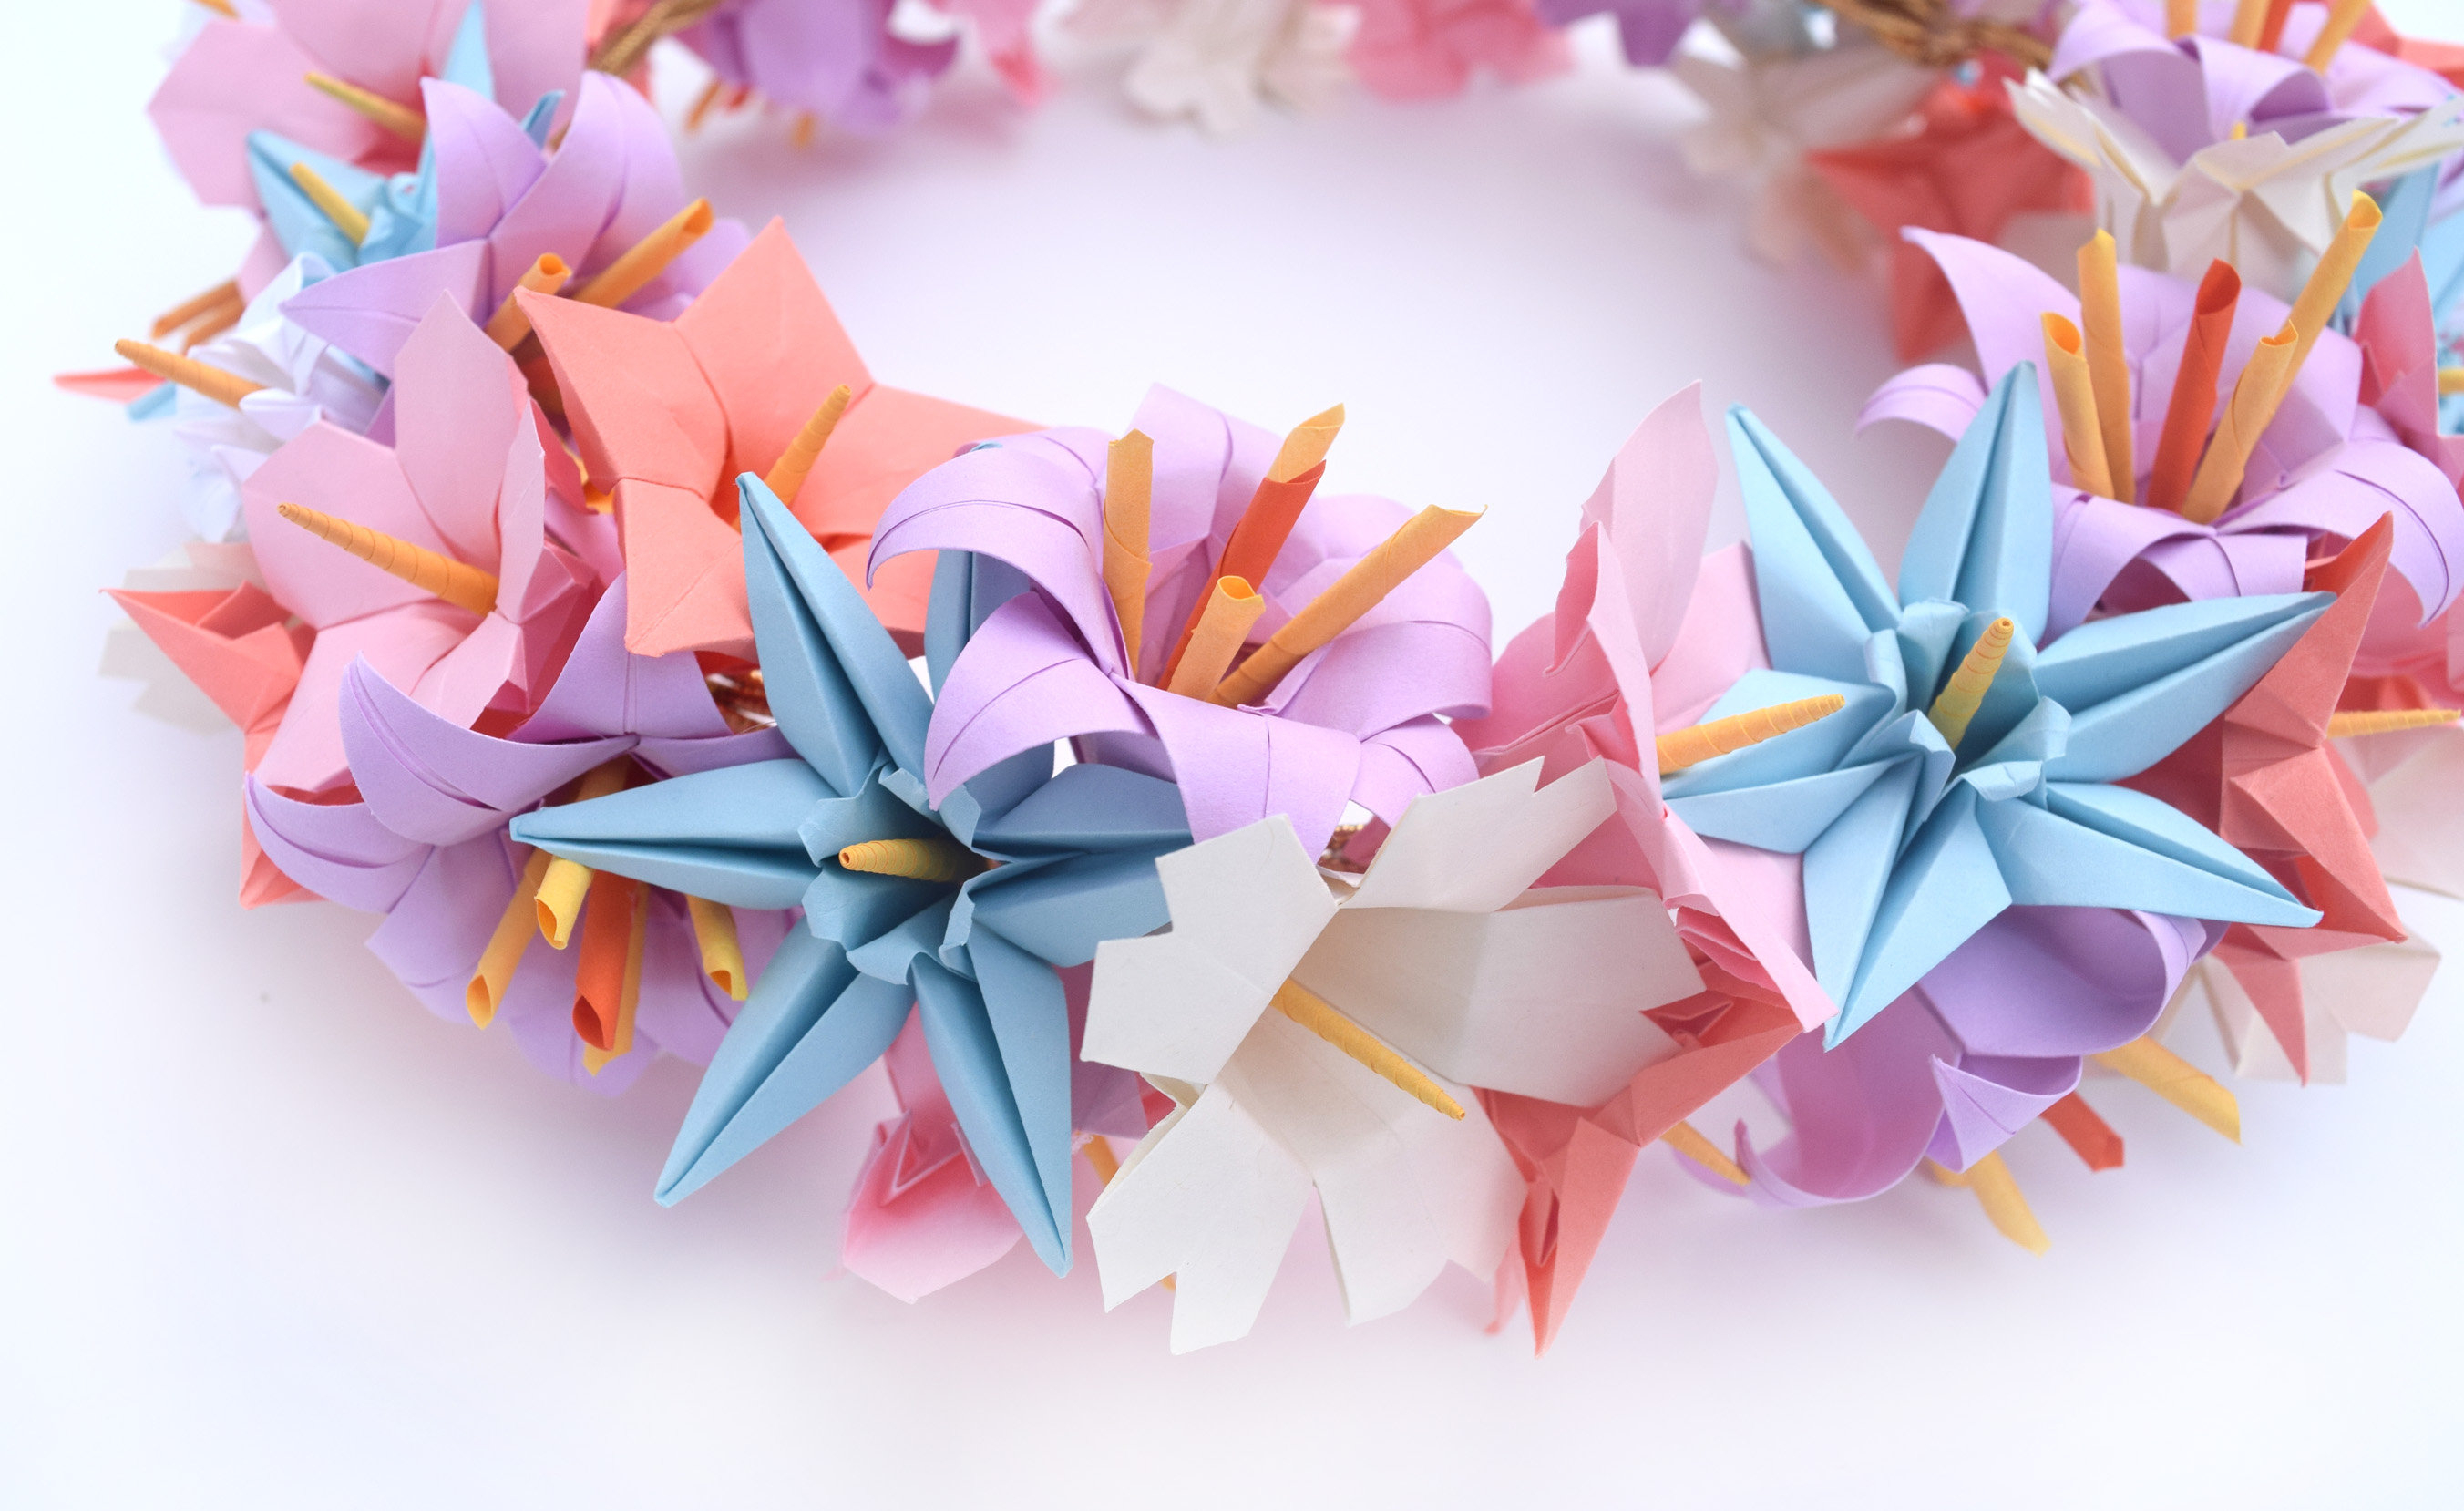 Origami Paper Crown Floral Crown Paper Floral Headband Origami Floral Halo Lavender And Pink Corona